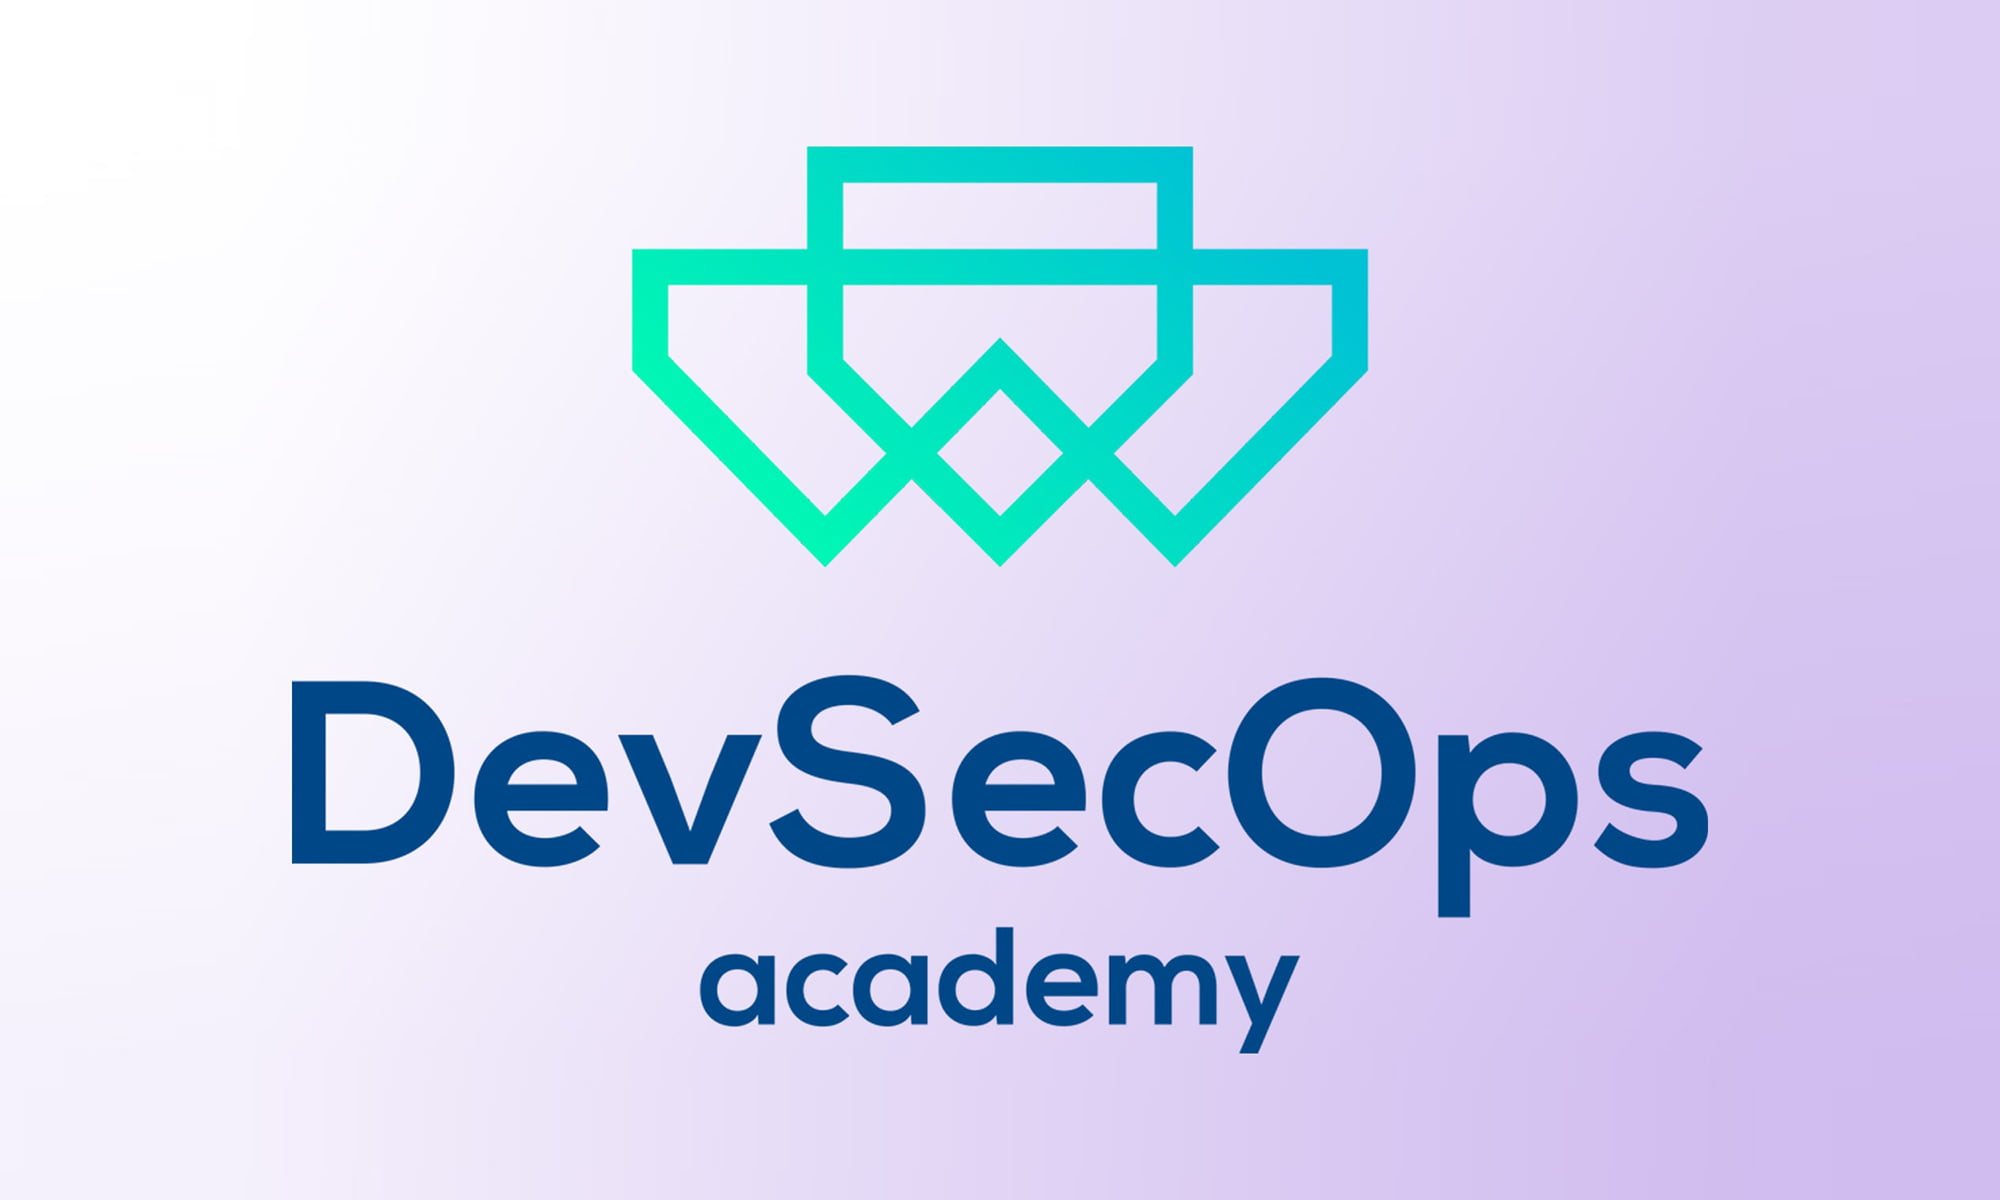 Debricked in collaboration with DevSecOps Academy